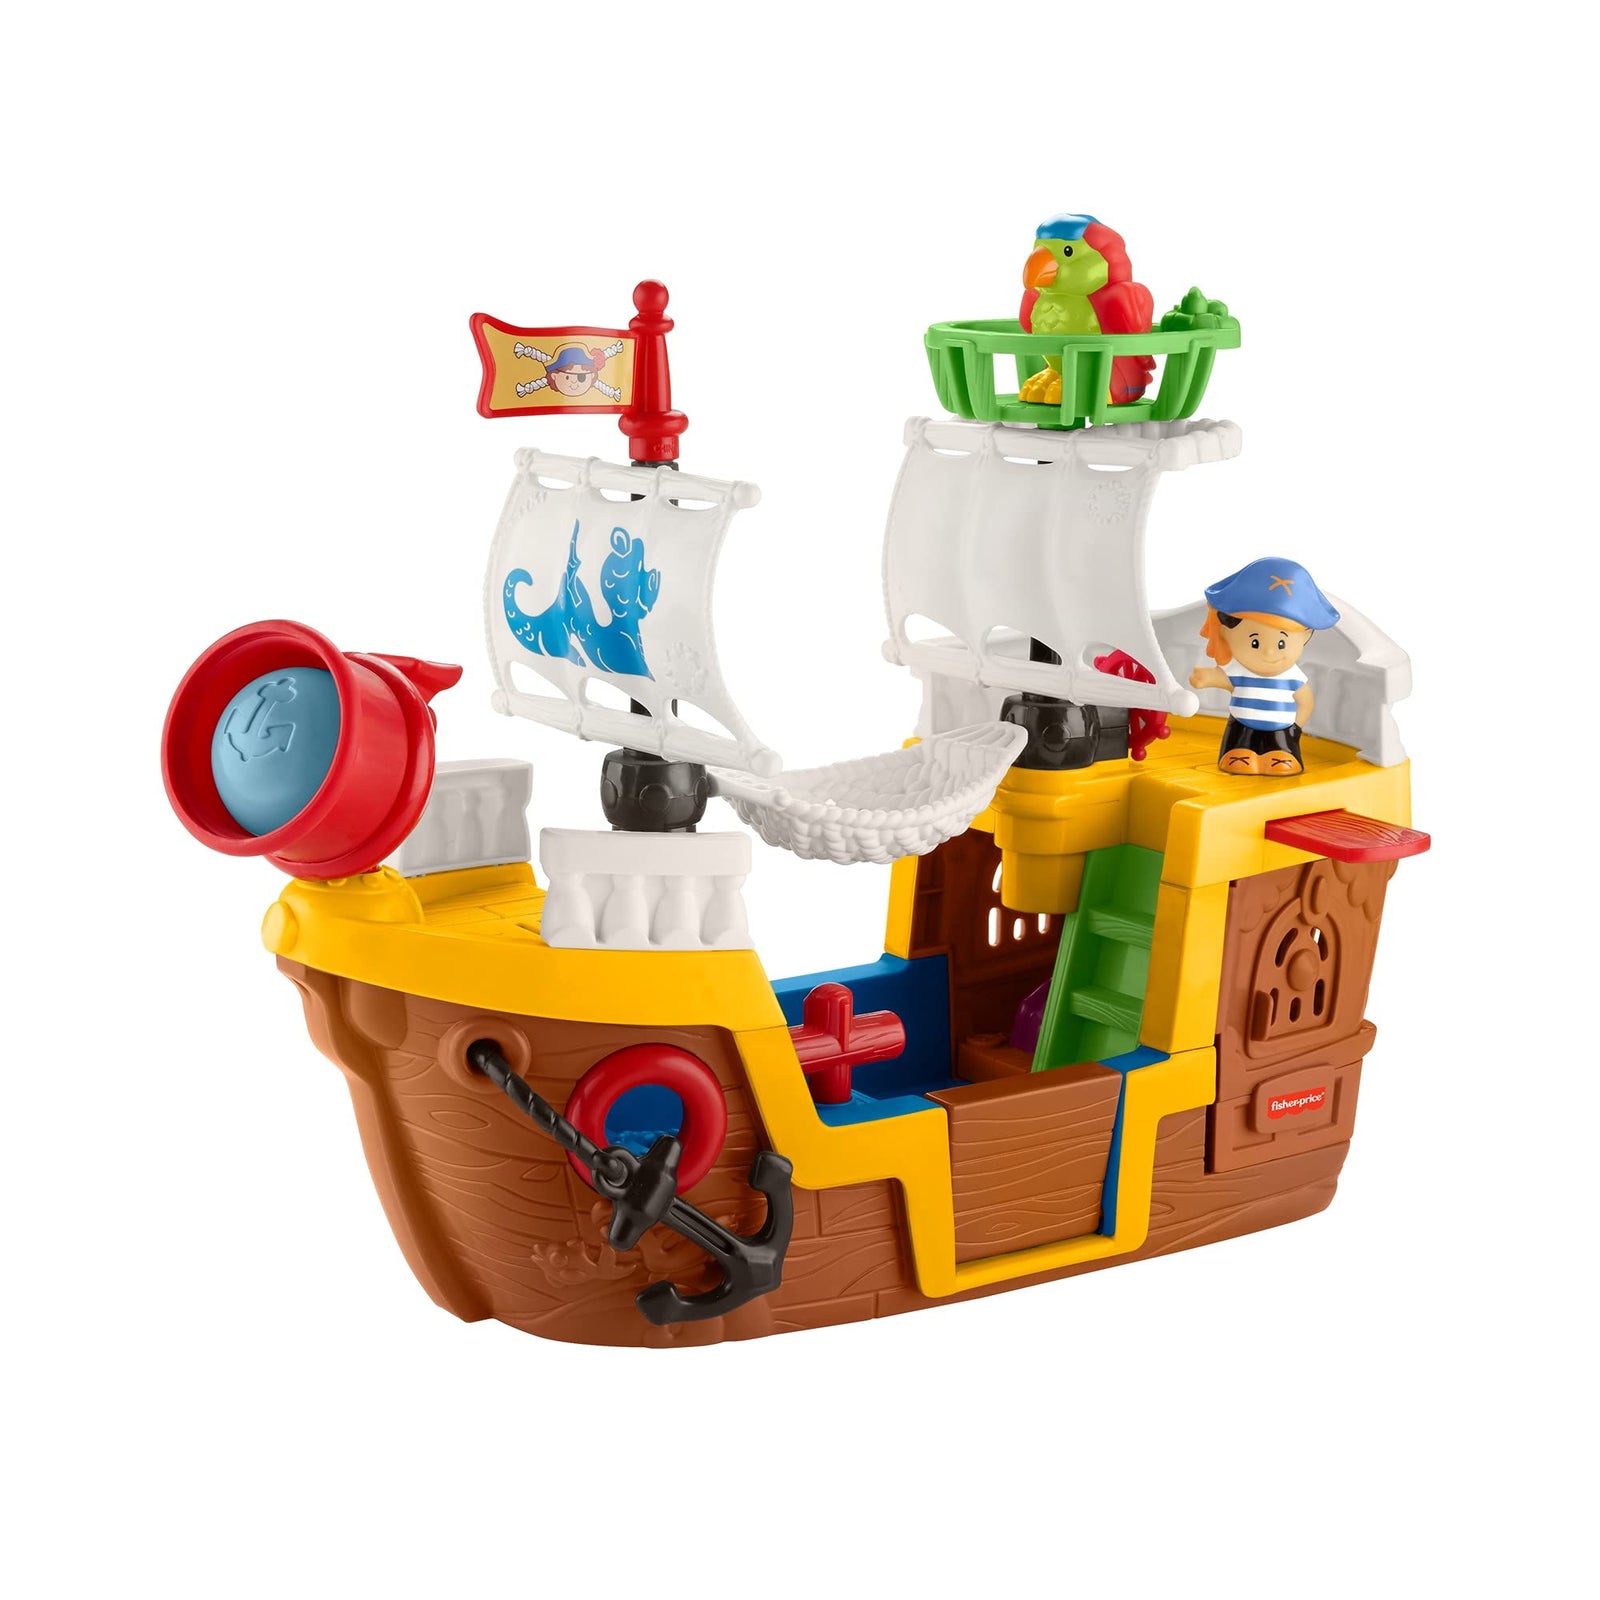 Fisher-Price Little People Pirate Ship playset with music, sounds and action for toddlers and preschool kids ages 1-5 years